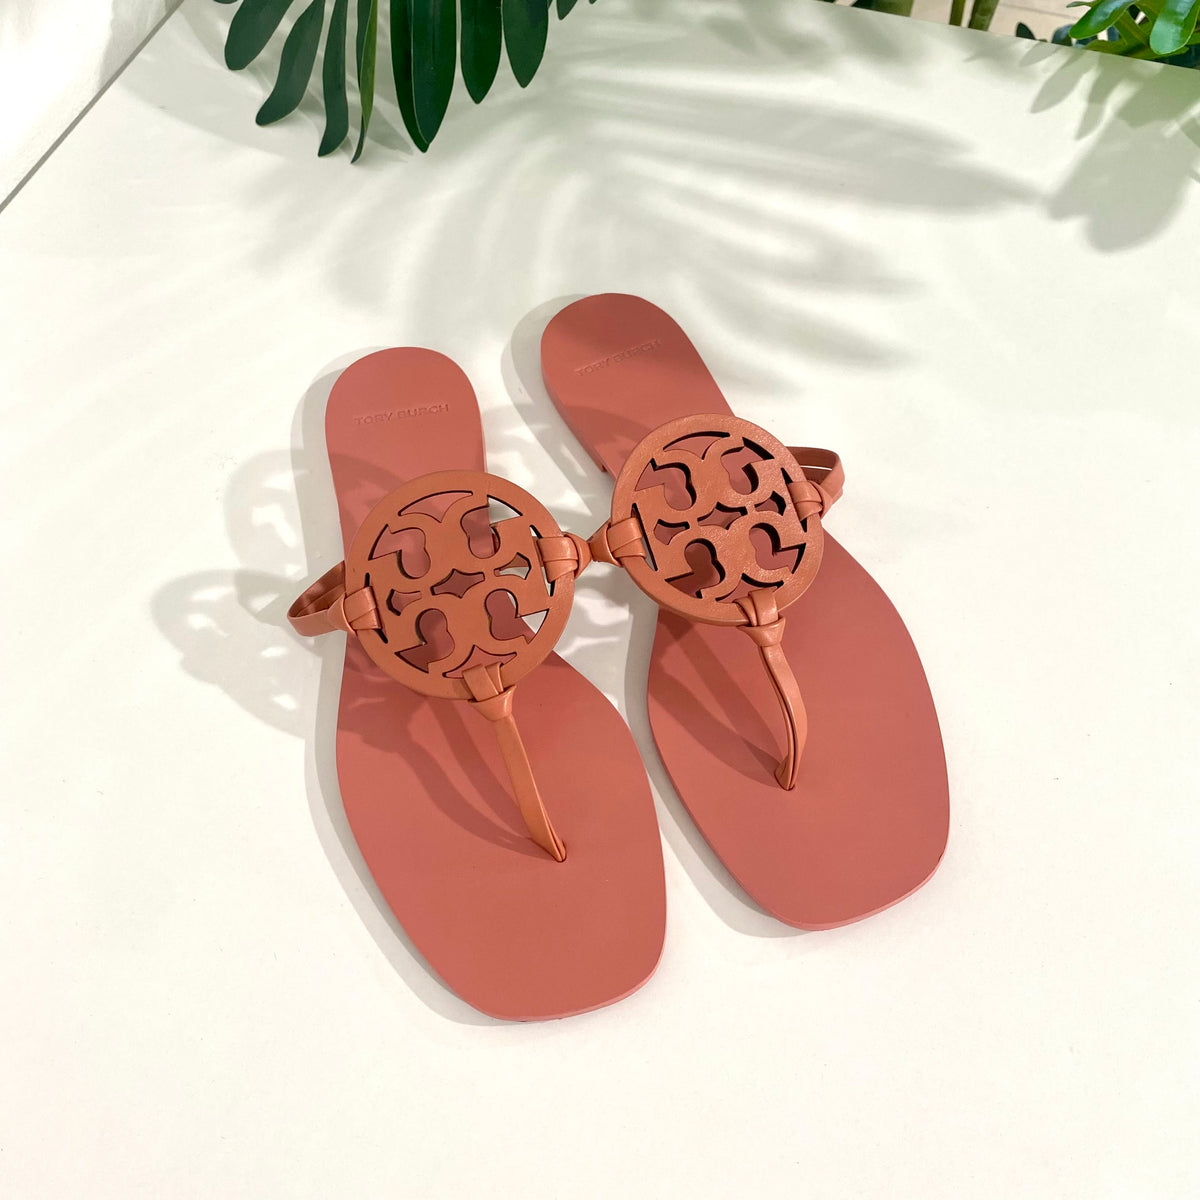 When You Find Pink Tory Burch Sandals, You Buy Them - BLONDIE IN THE CITY